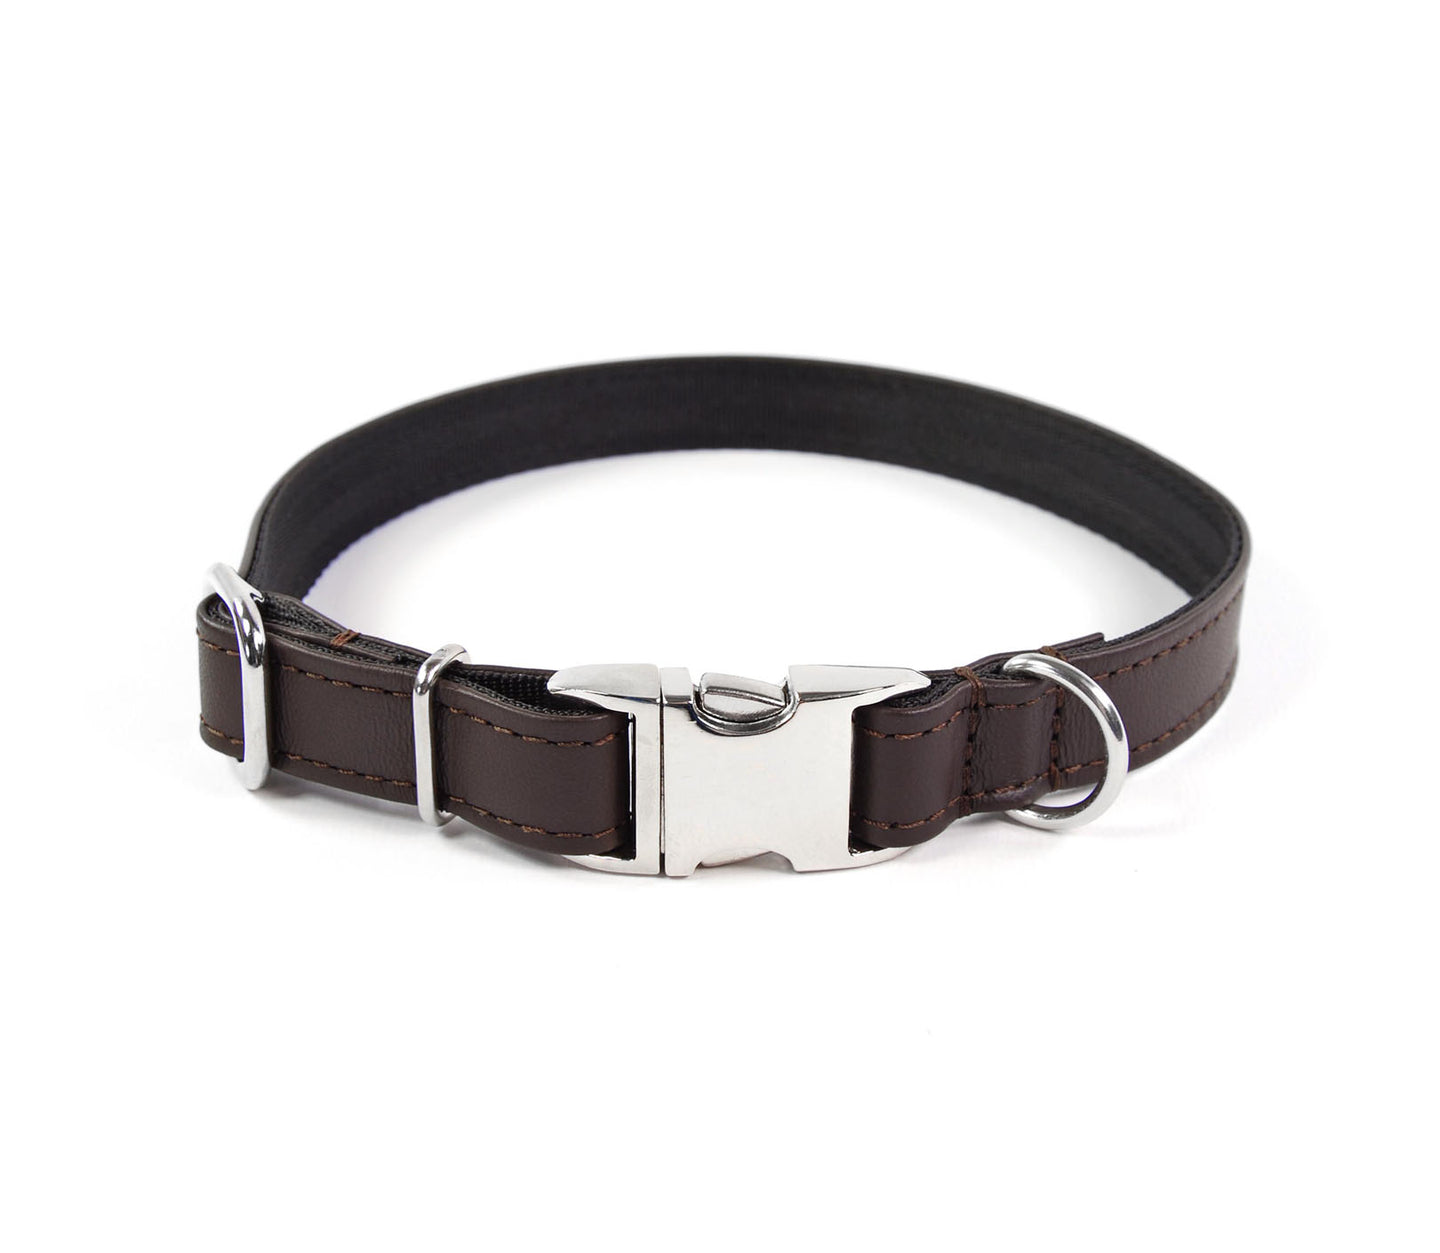 Clic Deluxe Leather Collar - div. Colours